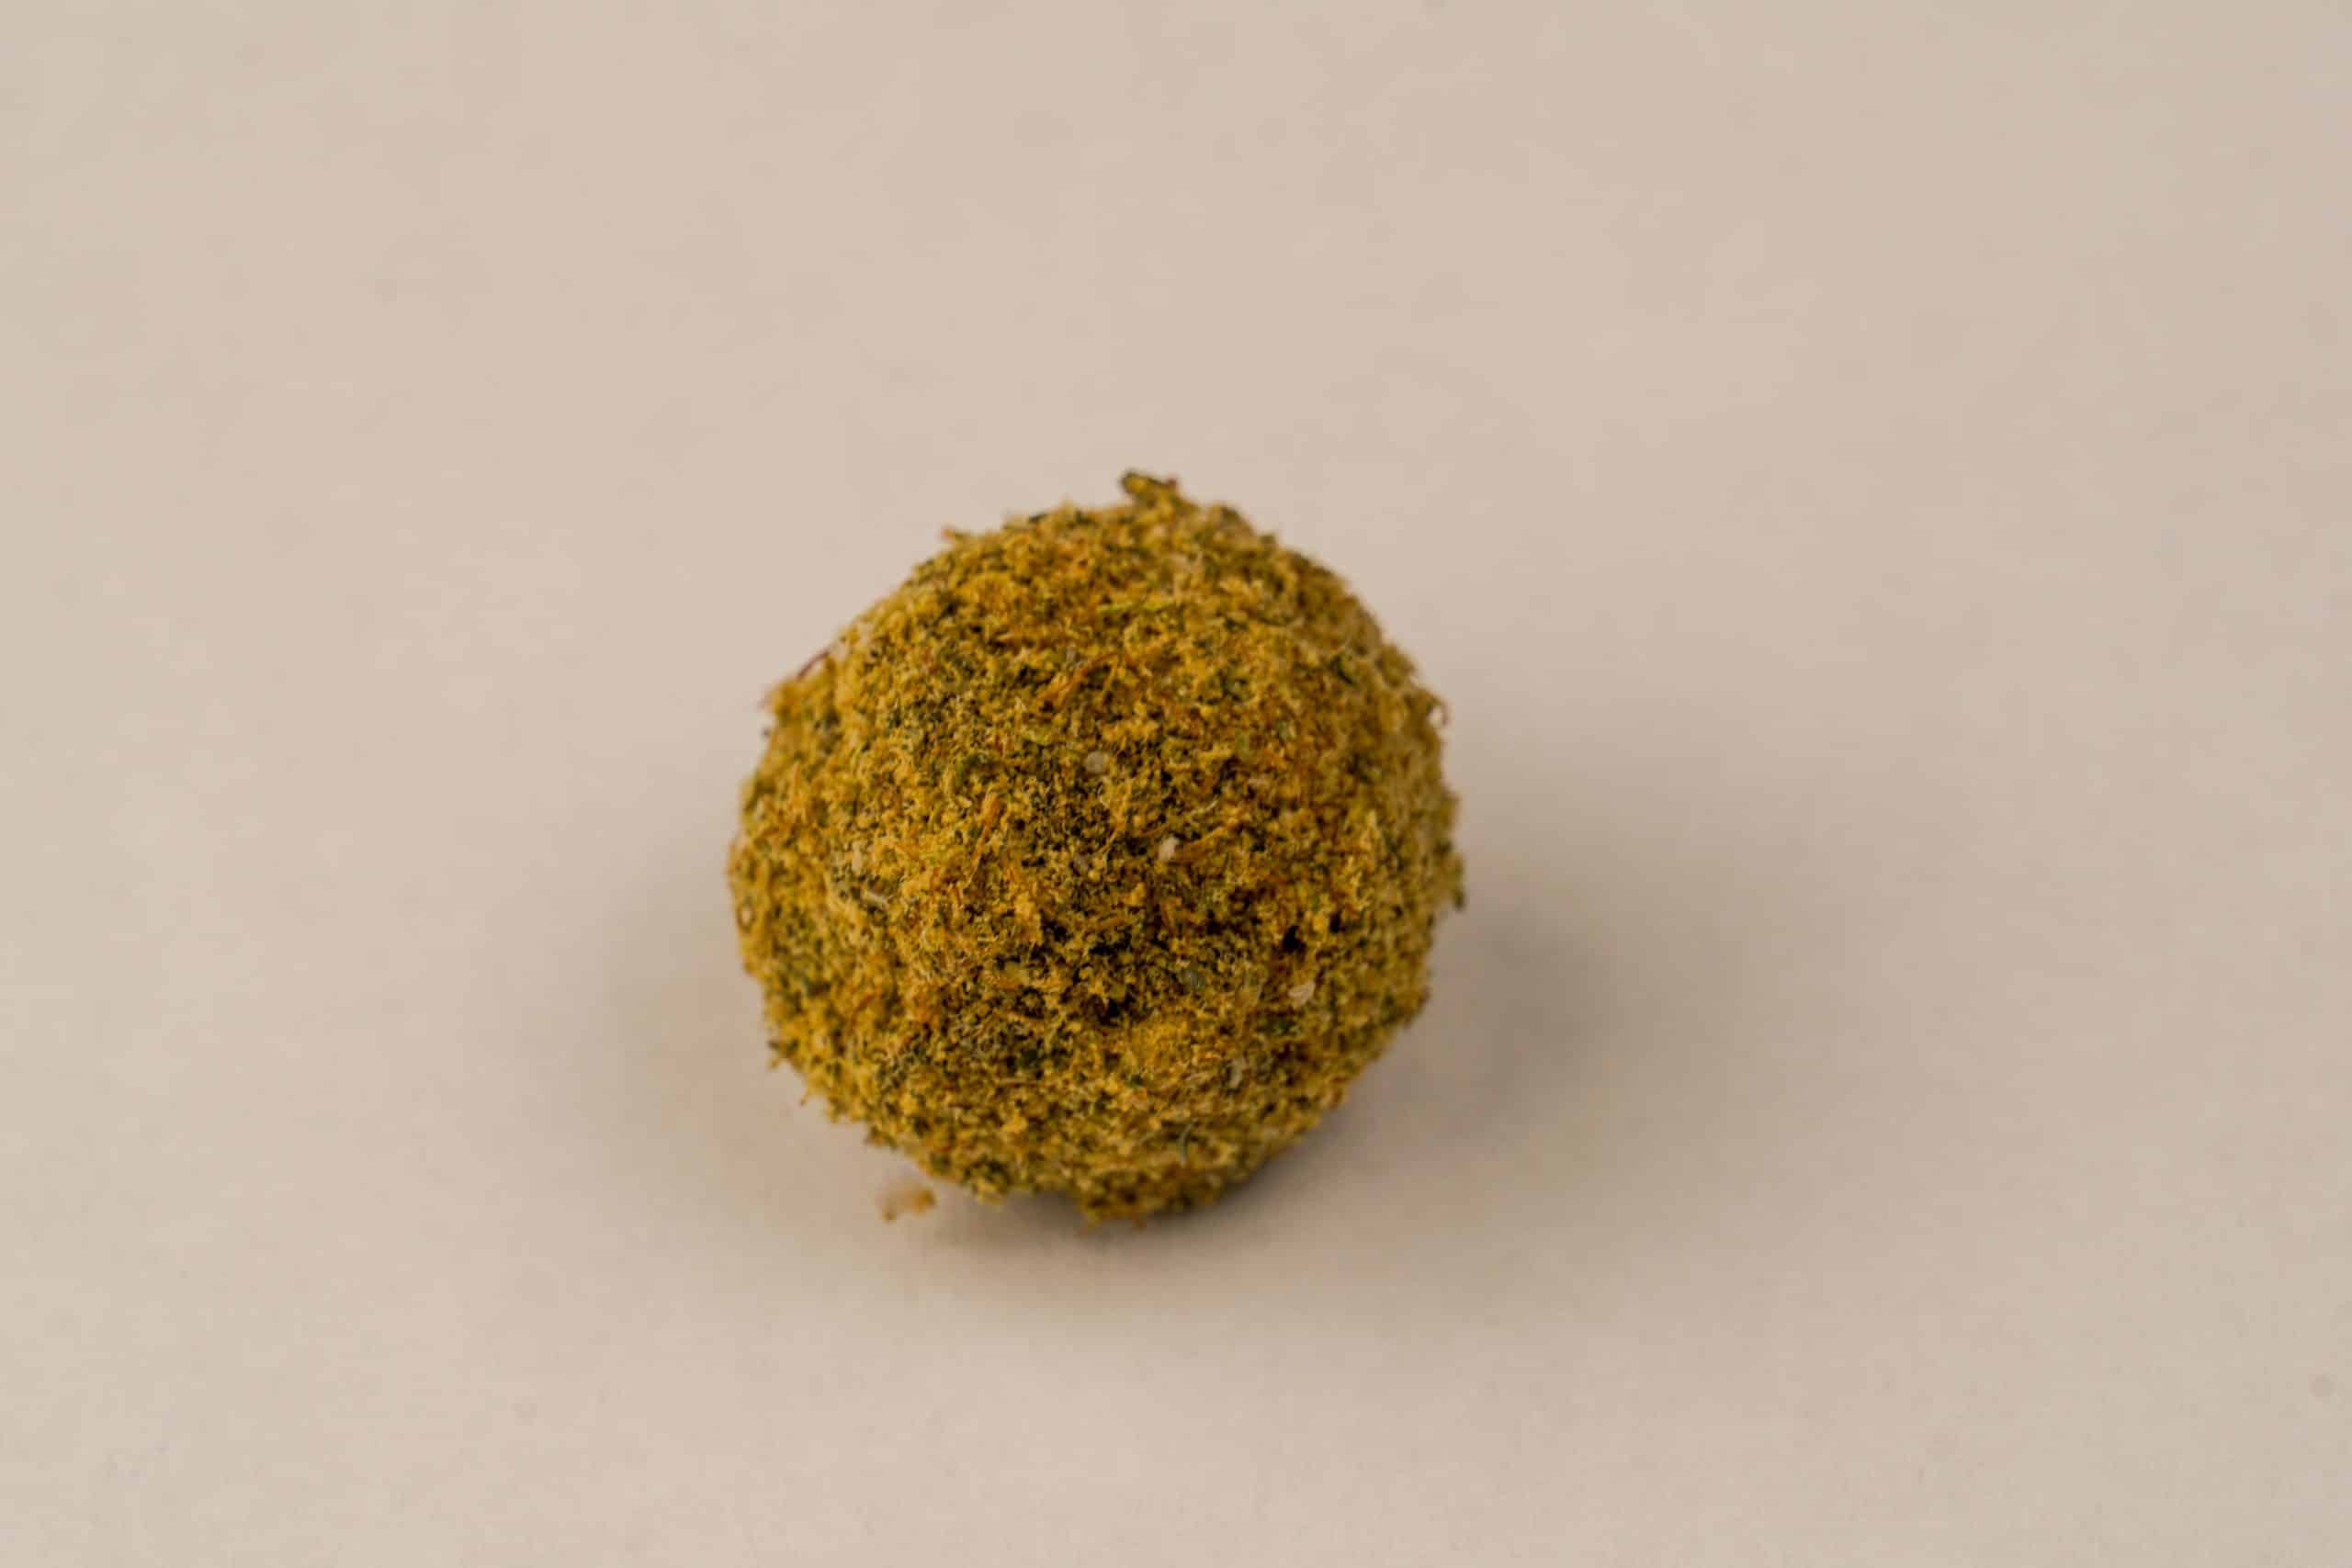 This is a picture of a "Moonrock" A piece of dried cannabis flow